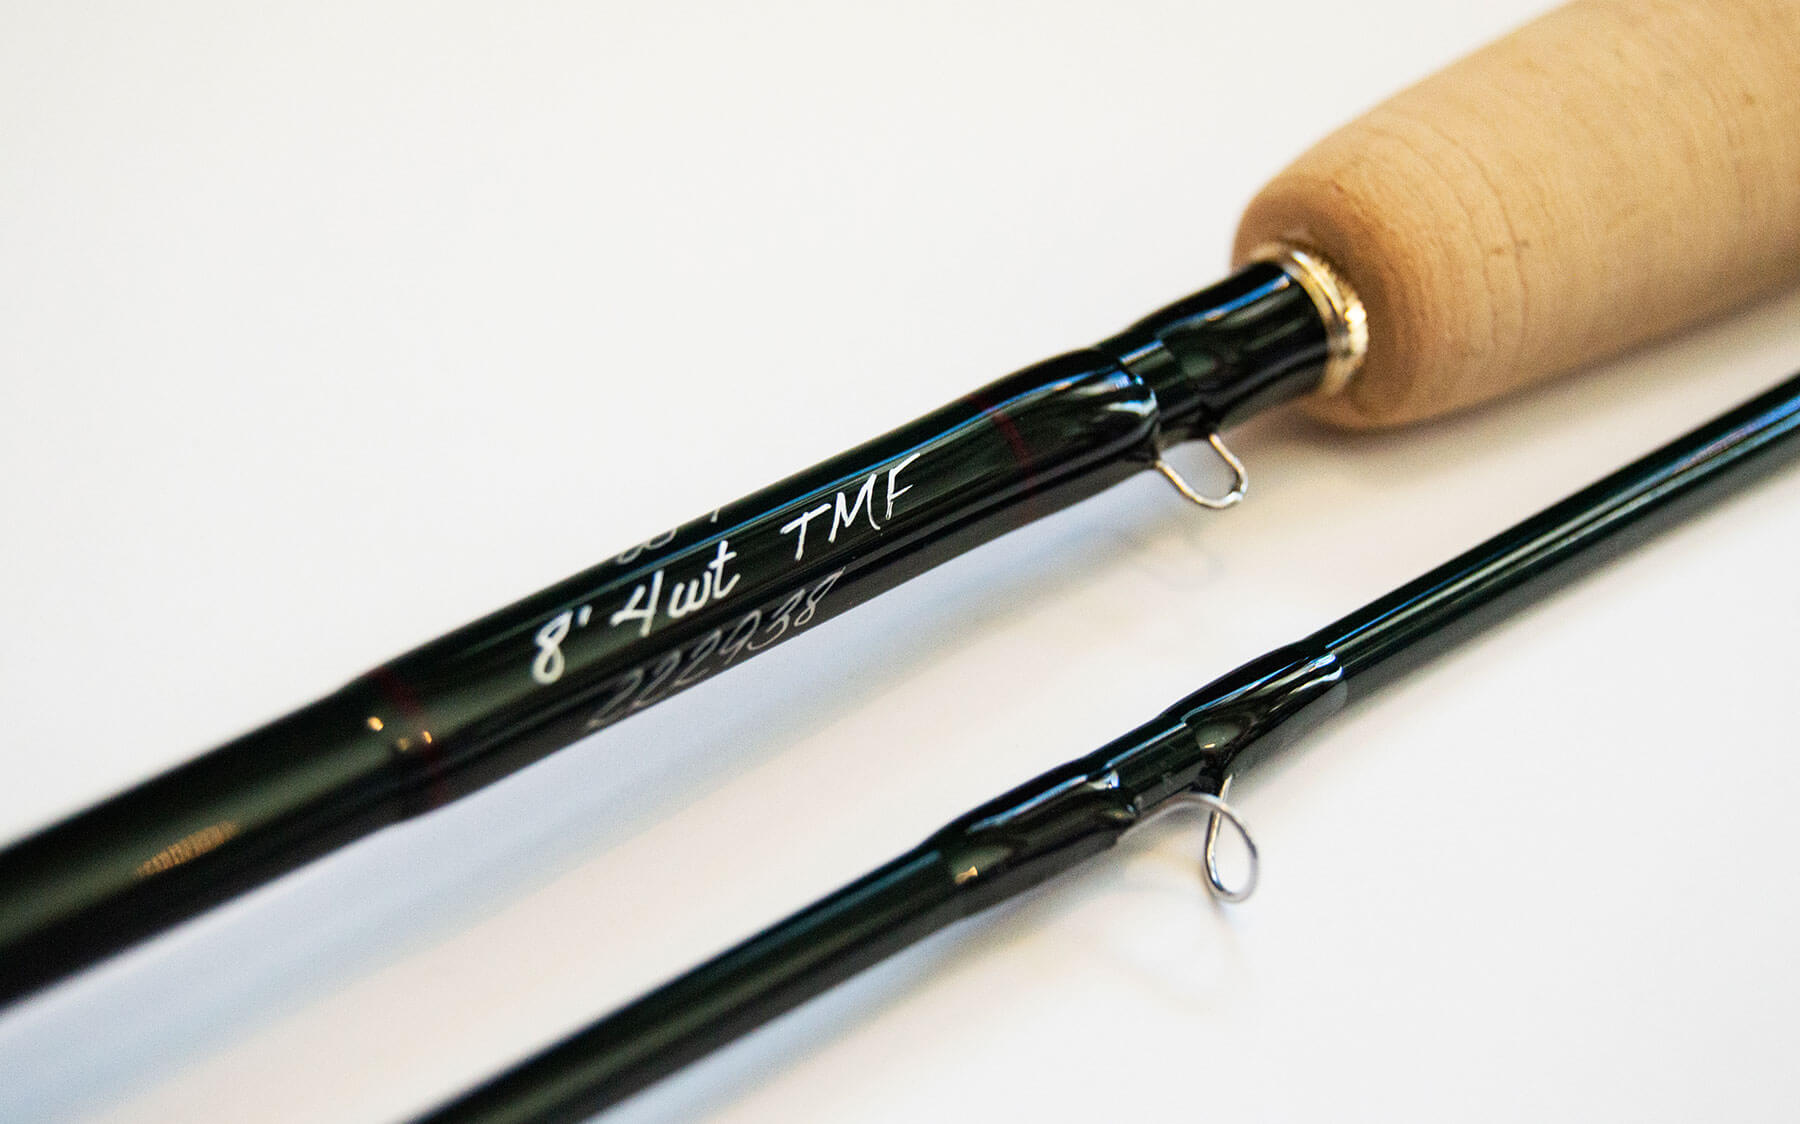 Scott And Winston Fly Rods On Sale! BACKWATER ANGLER, 41% OFF